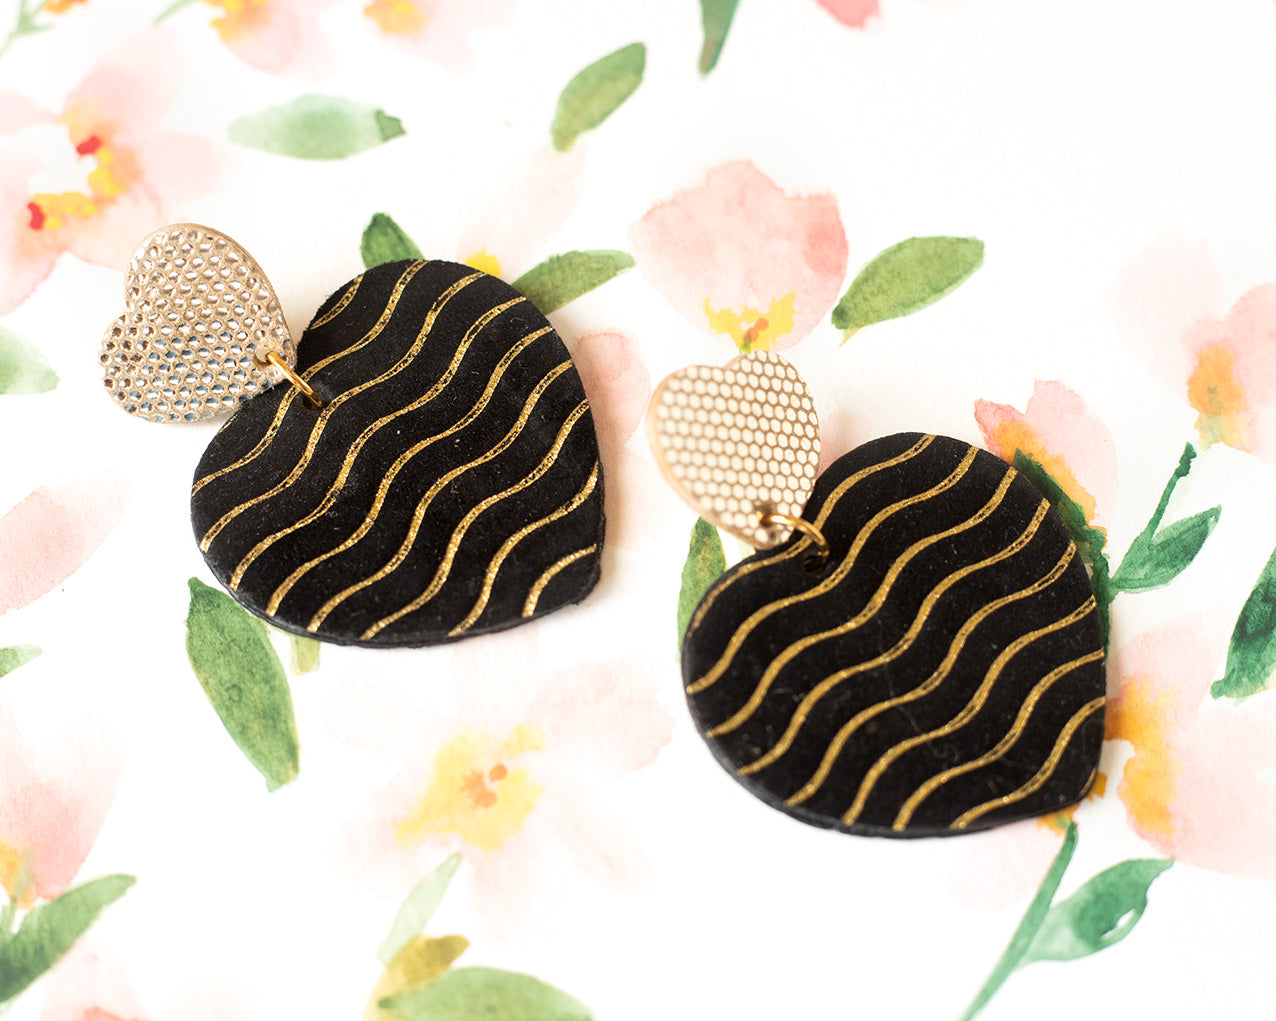 Gold Double Hearts Earrings with Polka Dots and Black